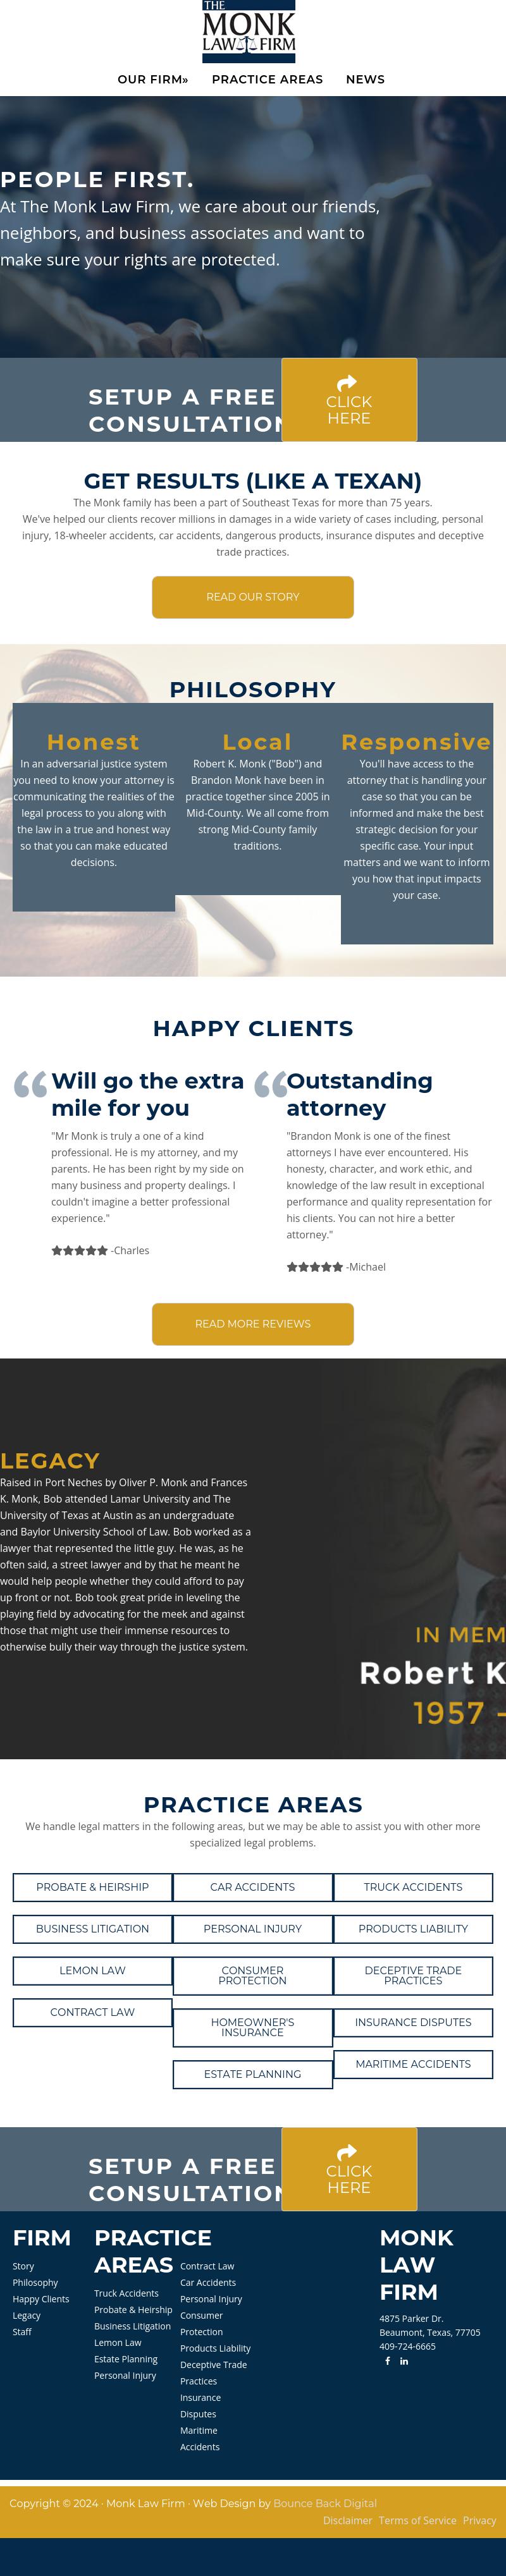 The Monk Law Firm - Port Arthur TX Lawyers